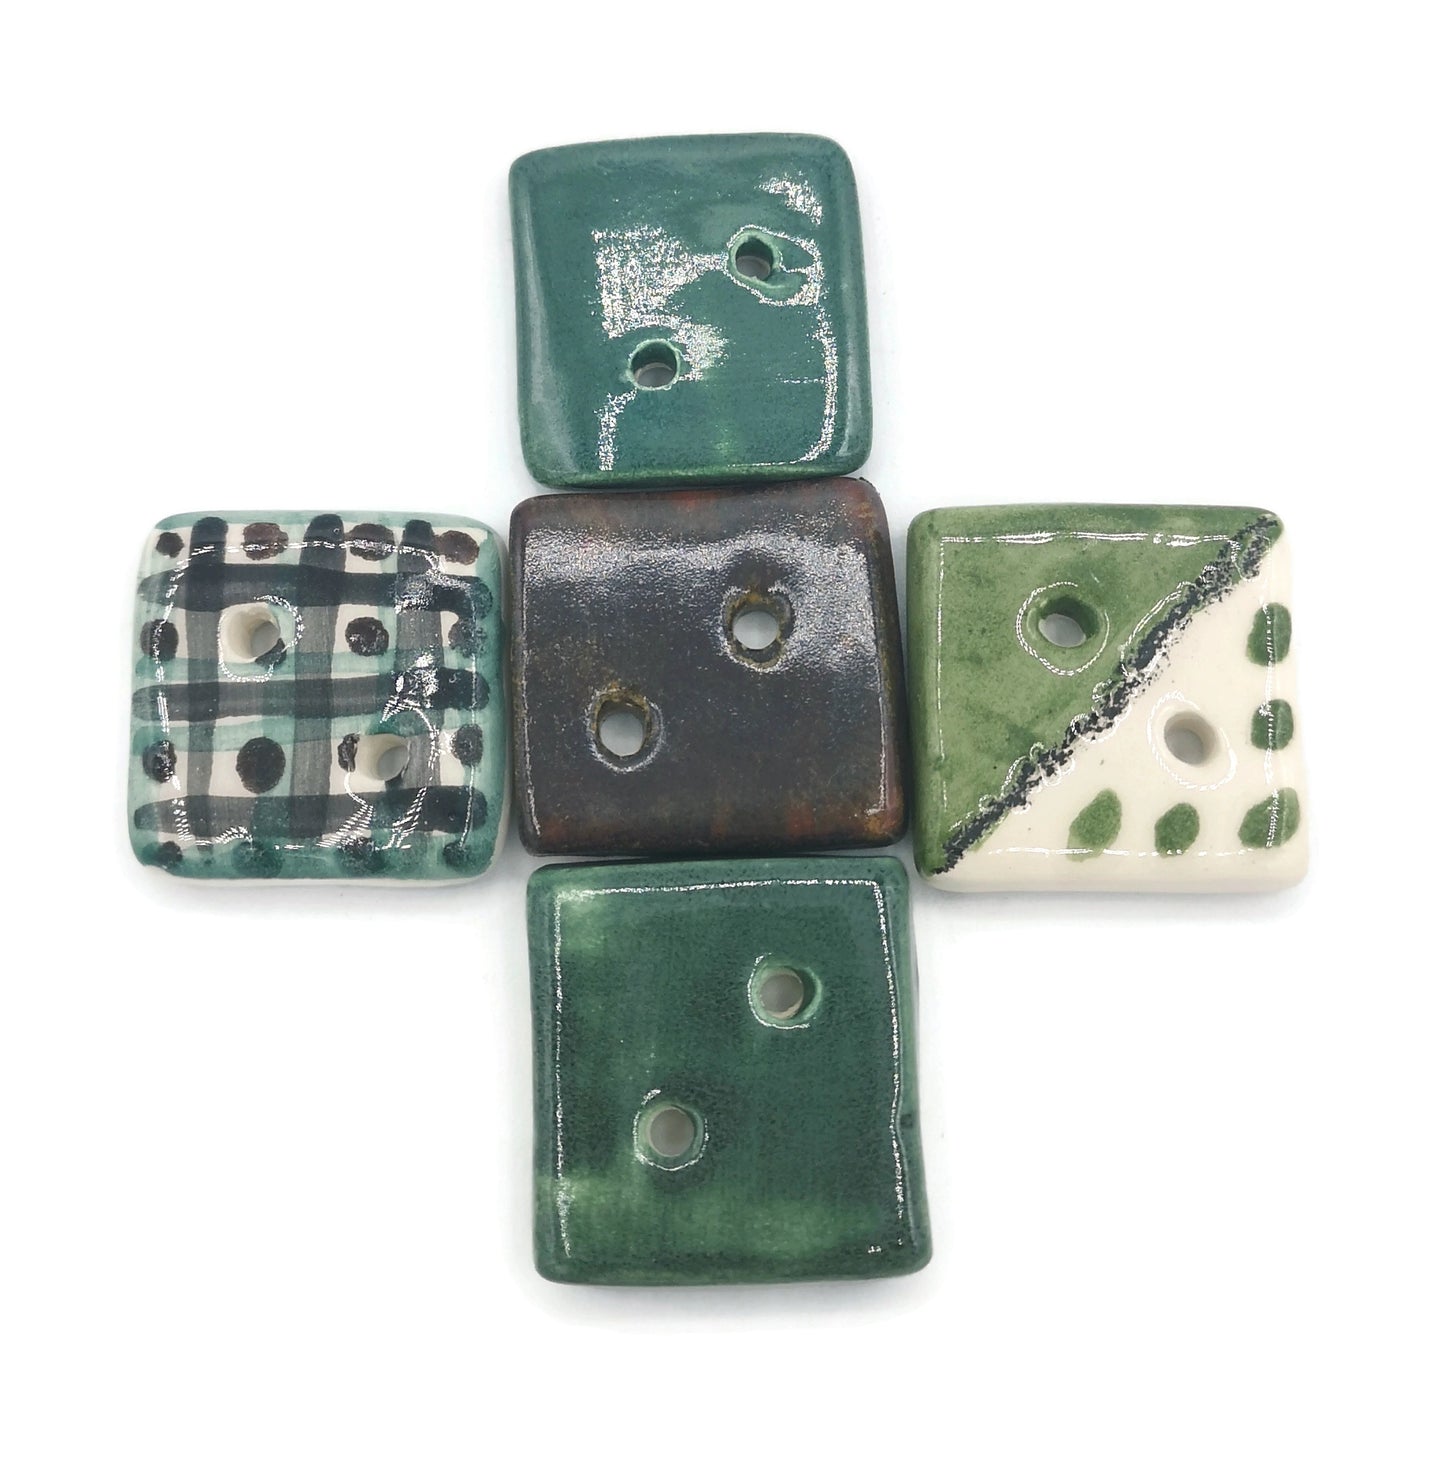 5Pc 30mm Handmade Ceramic Square Sewing Buttons For Crafts, 2 Hole Hand Painted Coat Buttons, Flat Back Button Lot, Blouse Buttons Flatback - Ceramica Ana Rafael